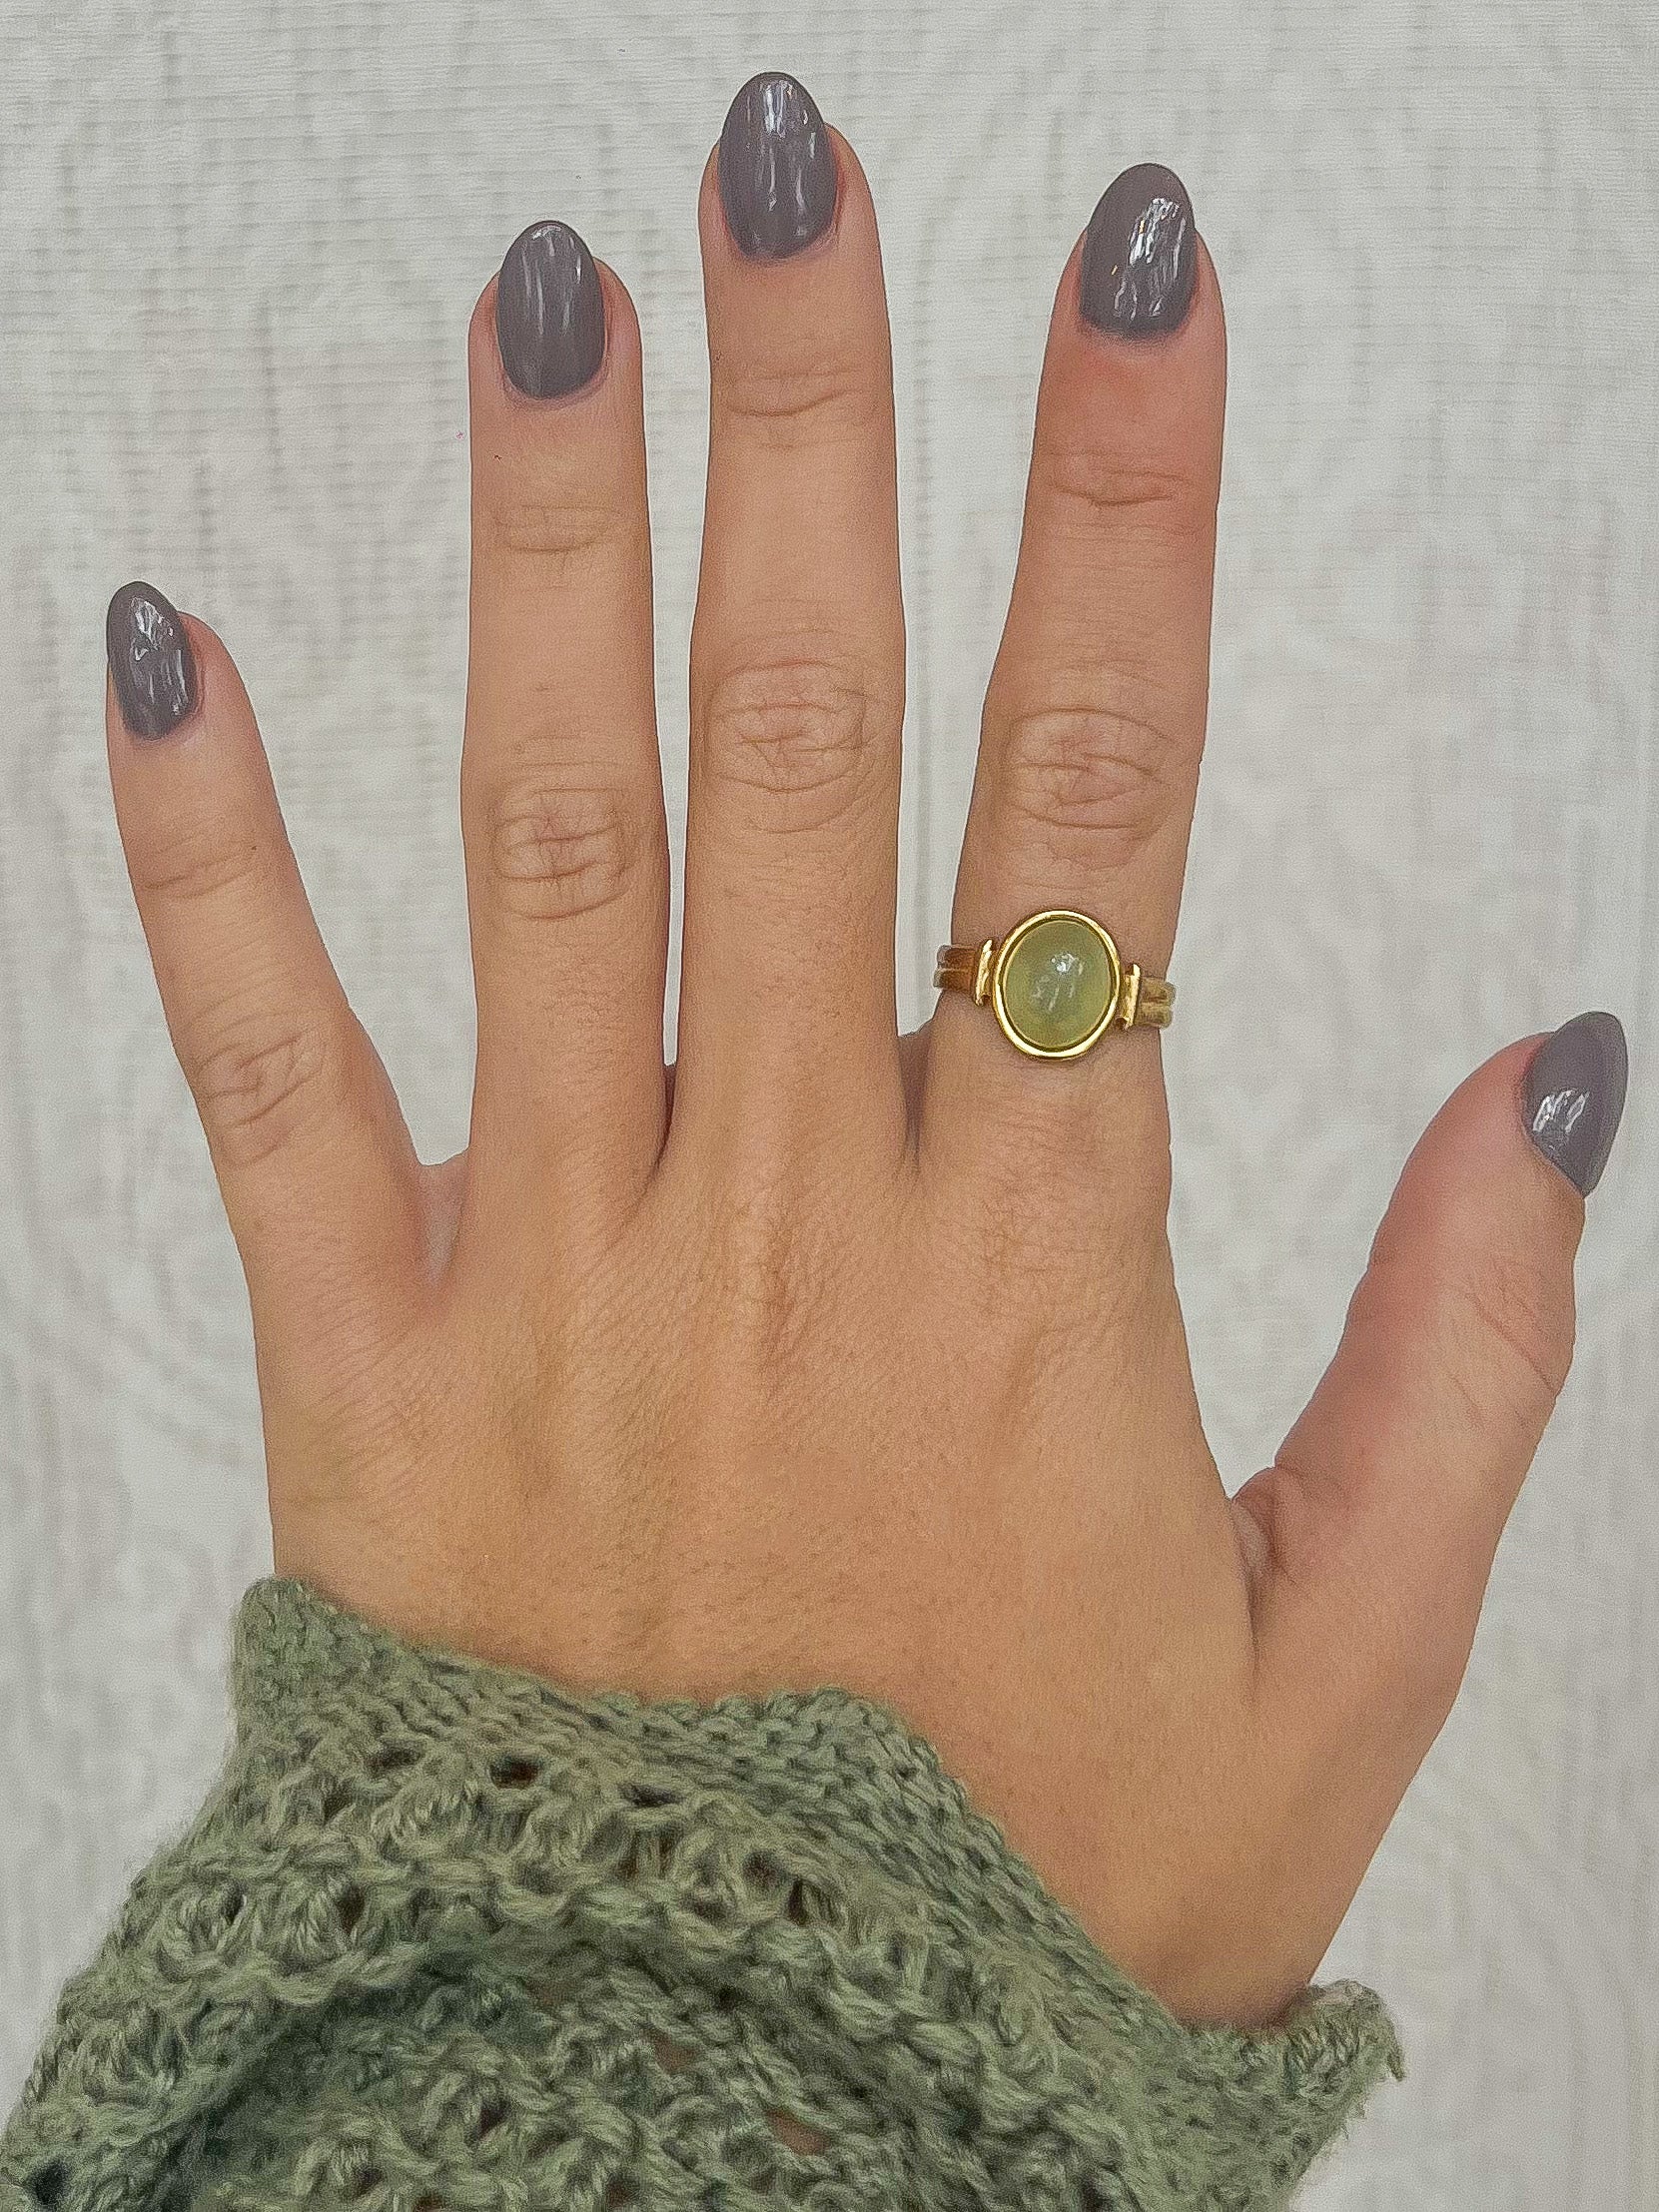 Lush Green Ring - For the Girls Jewelry